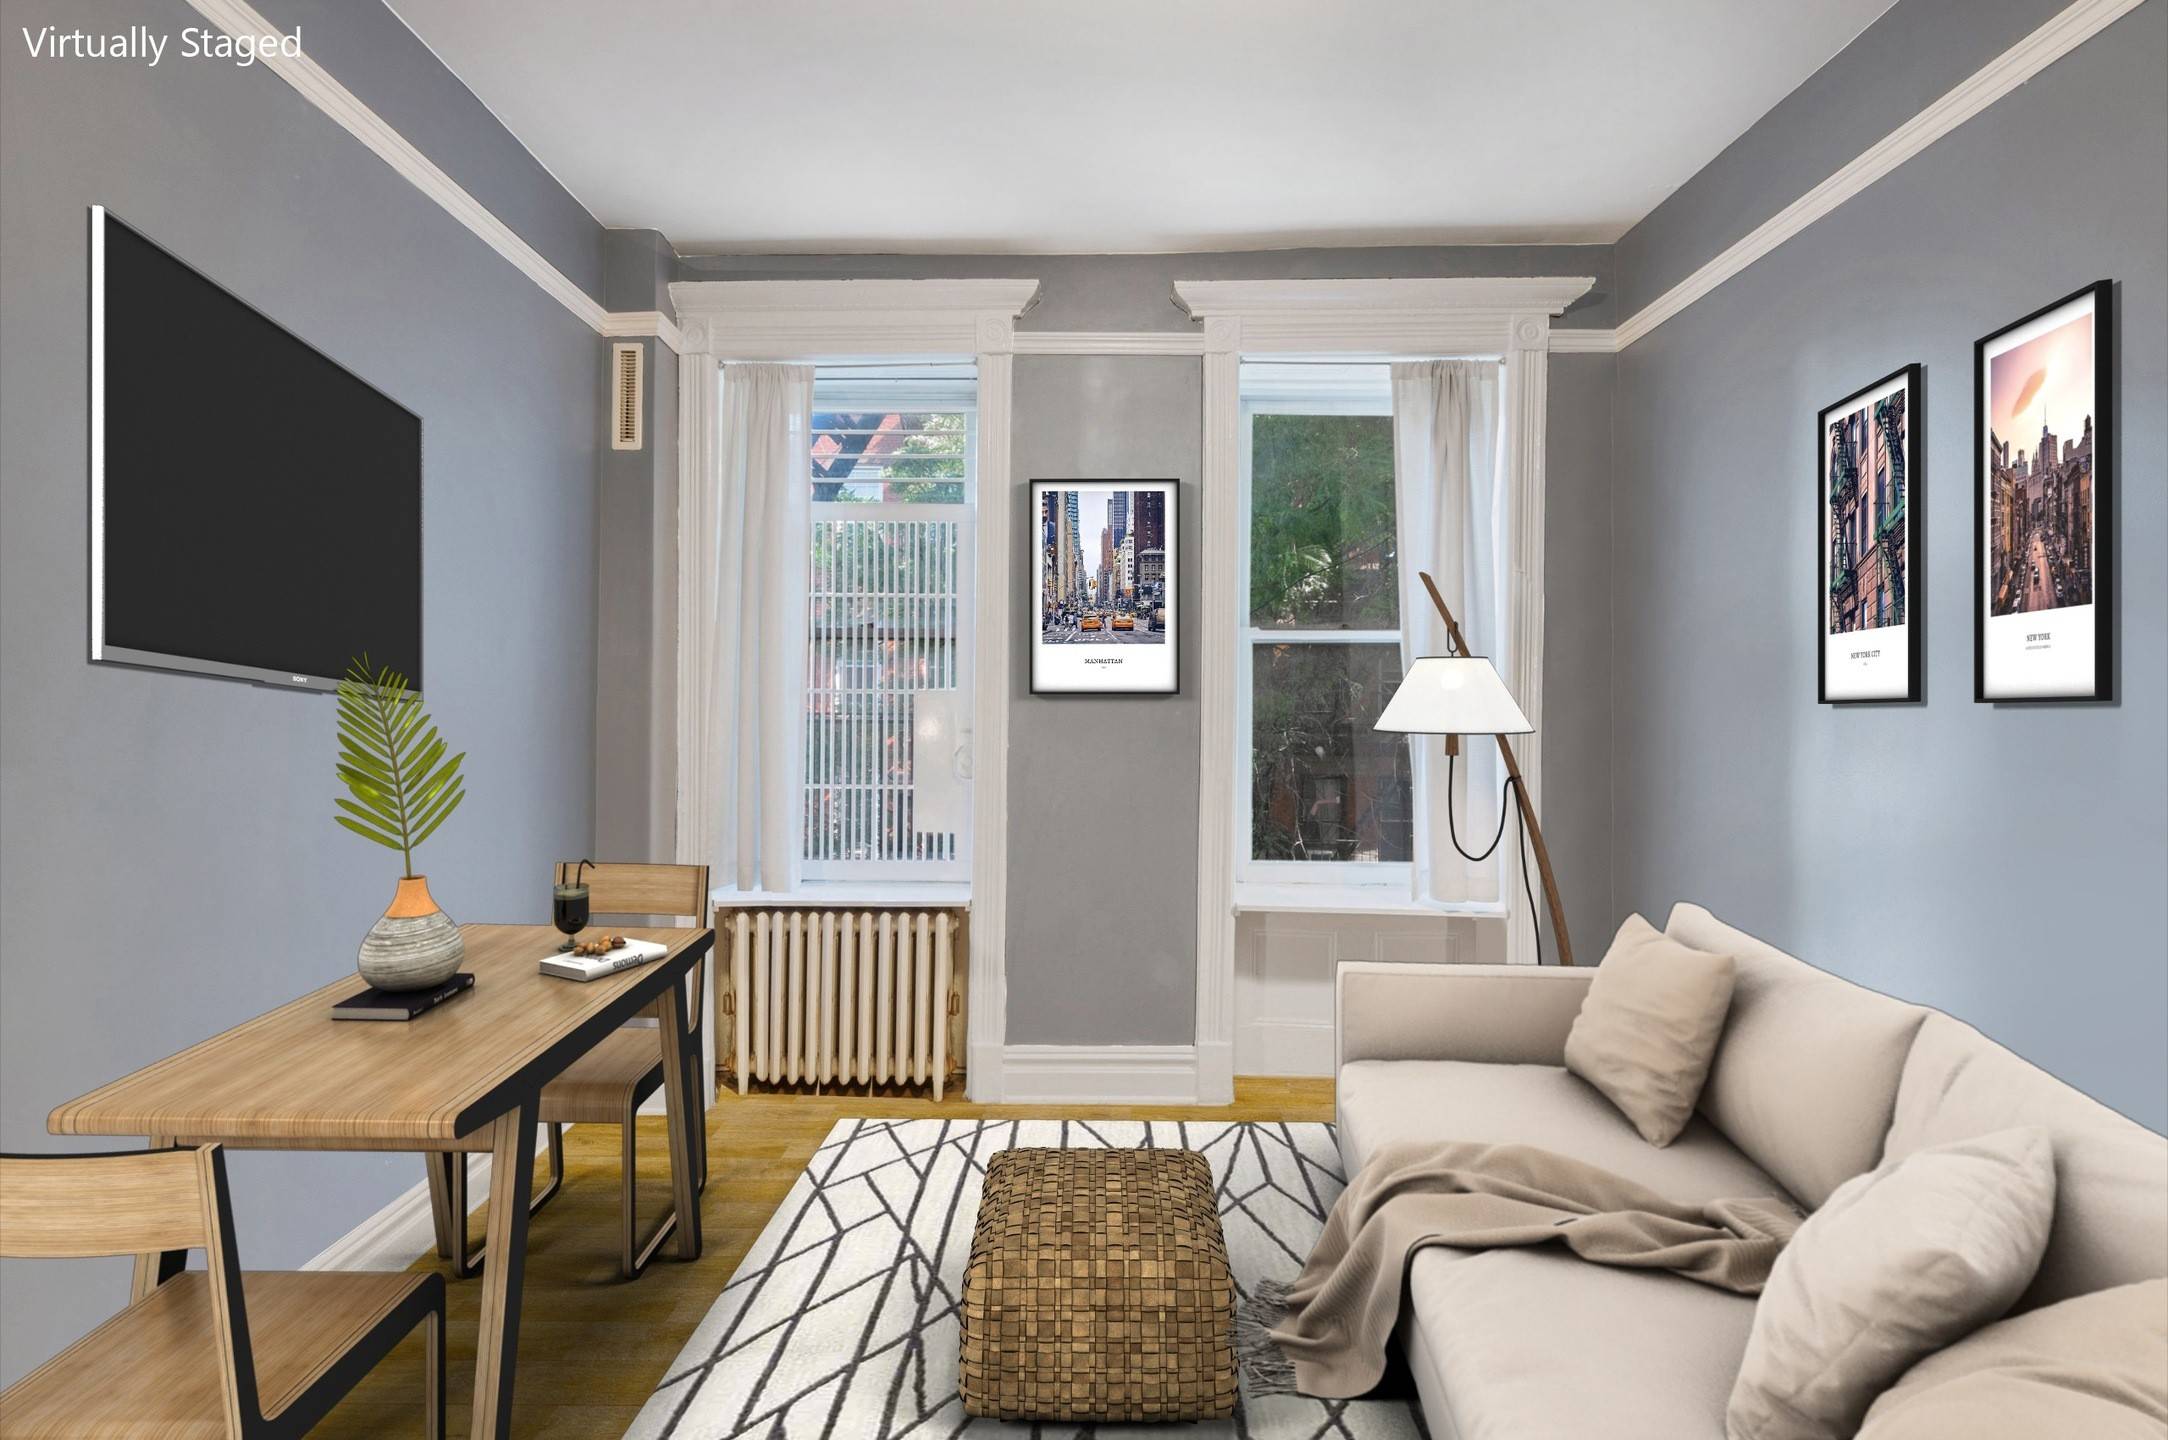 This updated light filled home is located in the heart of the desirable WEST VILLAGE neighborhood.